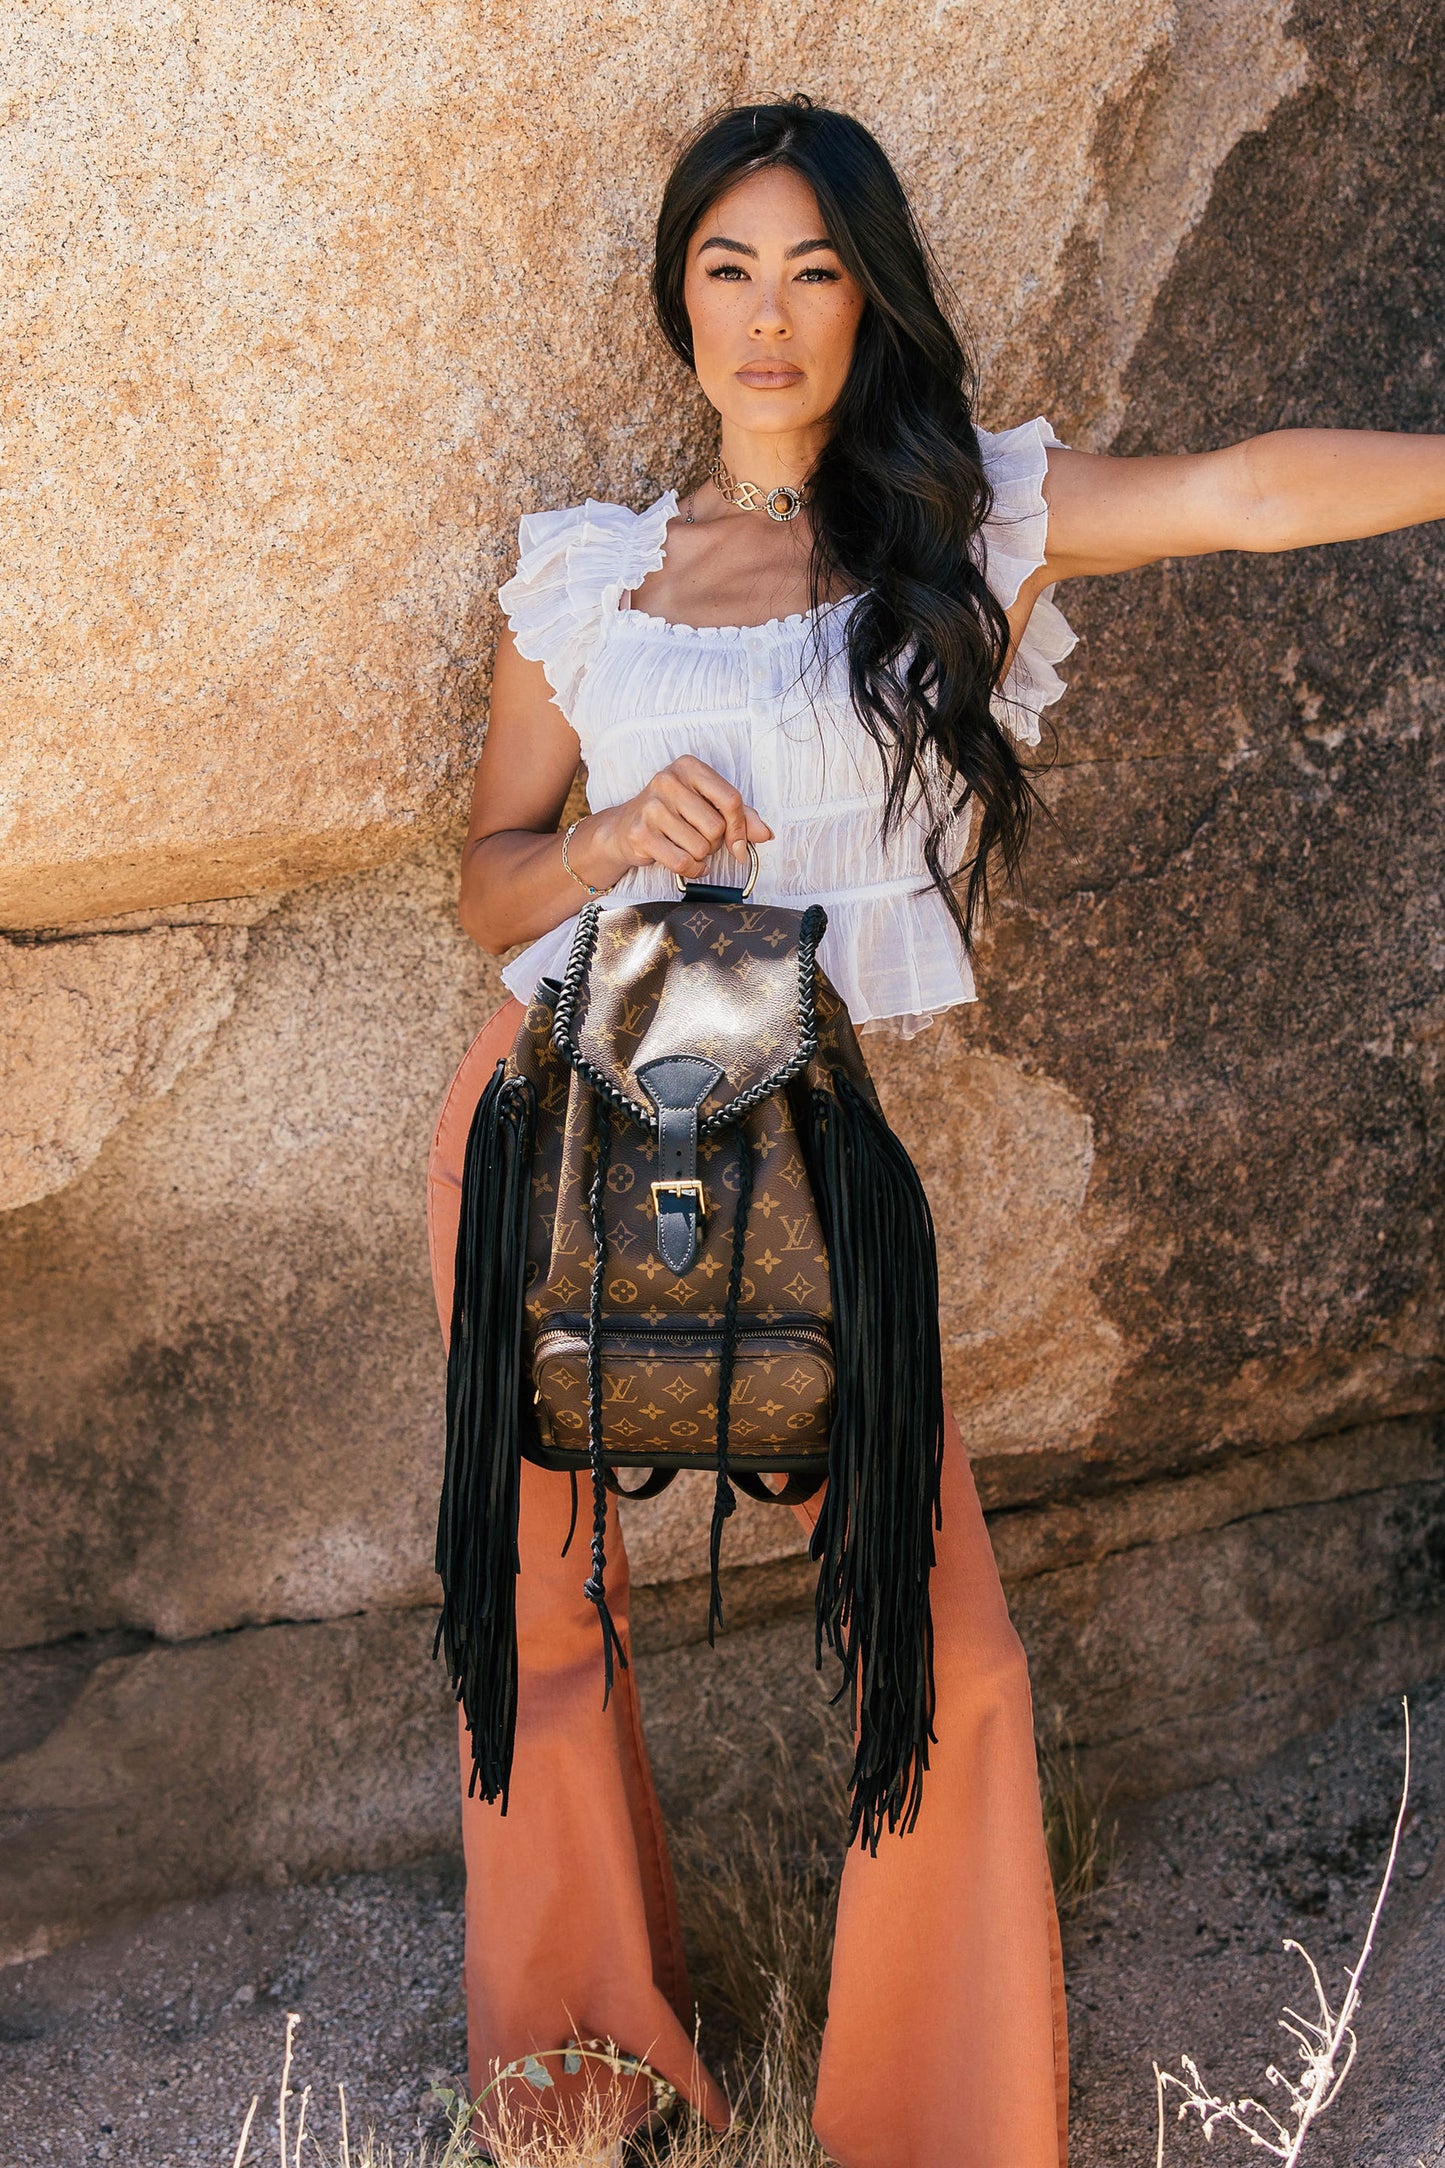 Louis Vuitton, Bags, Custom Boho Louis Vuitton Backpack With Fringe